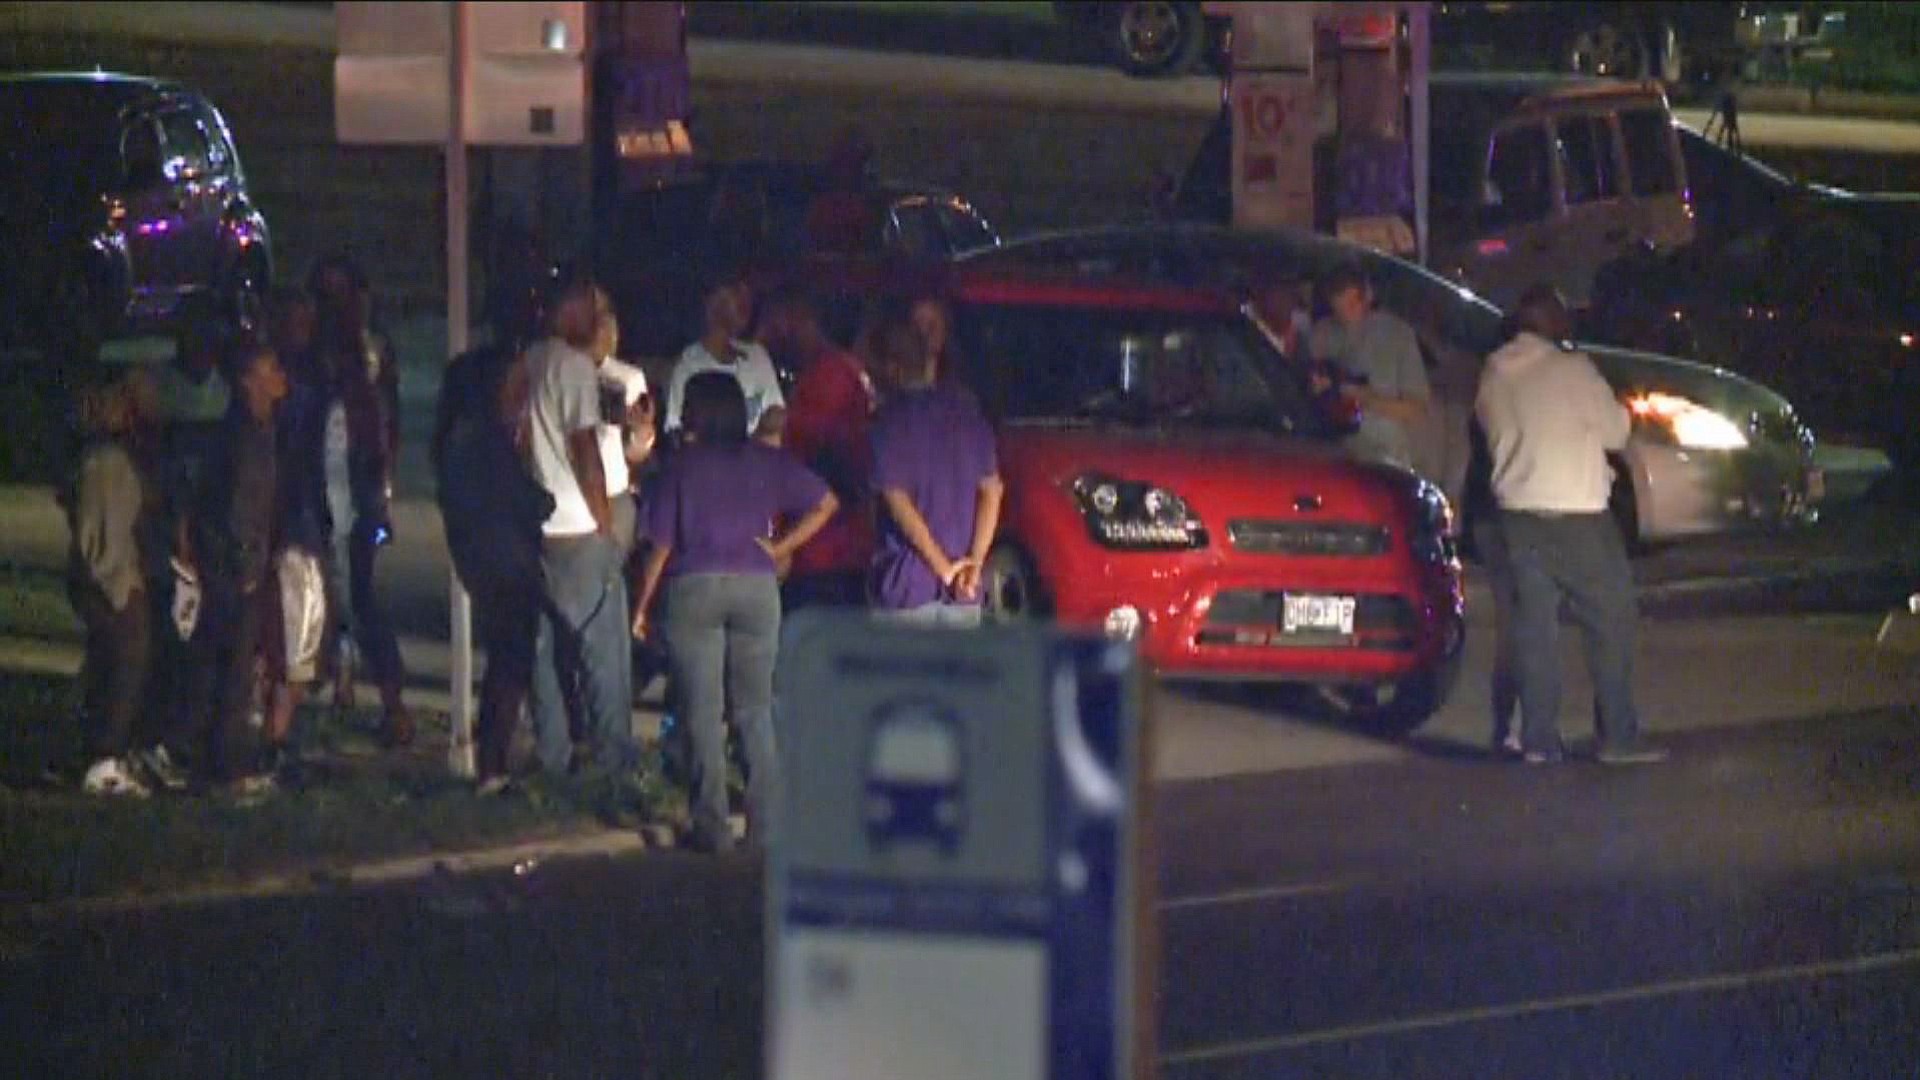 A crowd gathers near the scene where a police officer was shot in the arm Saturday night in Ferguson, Mo. The officer was shot in the arm and is expected to survive, St.